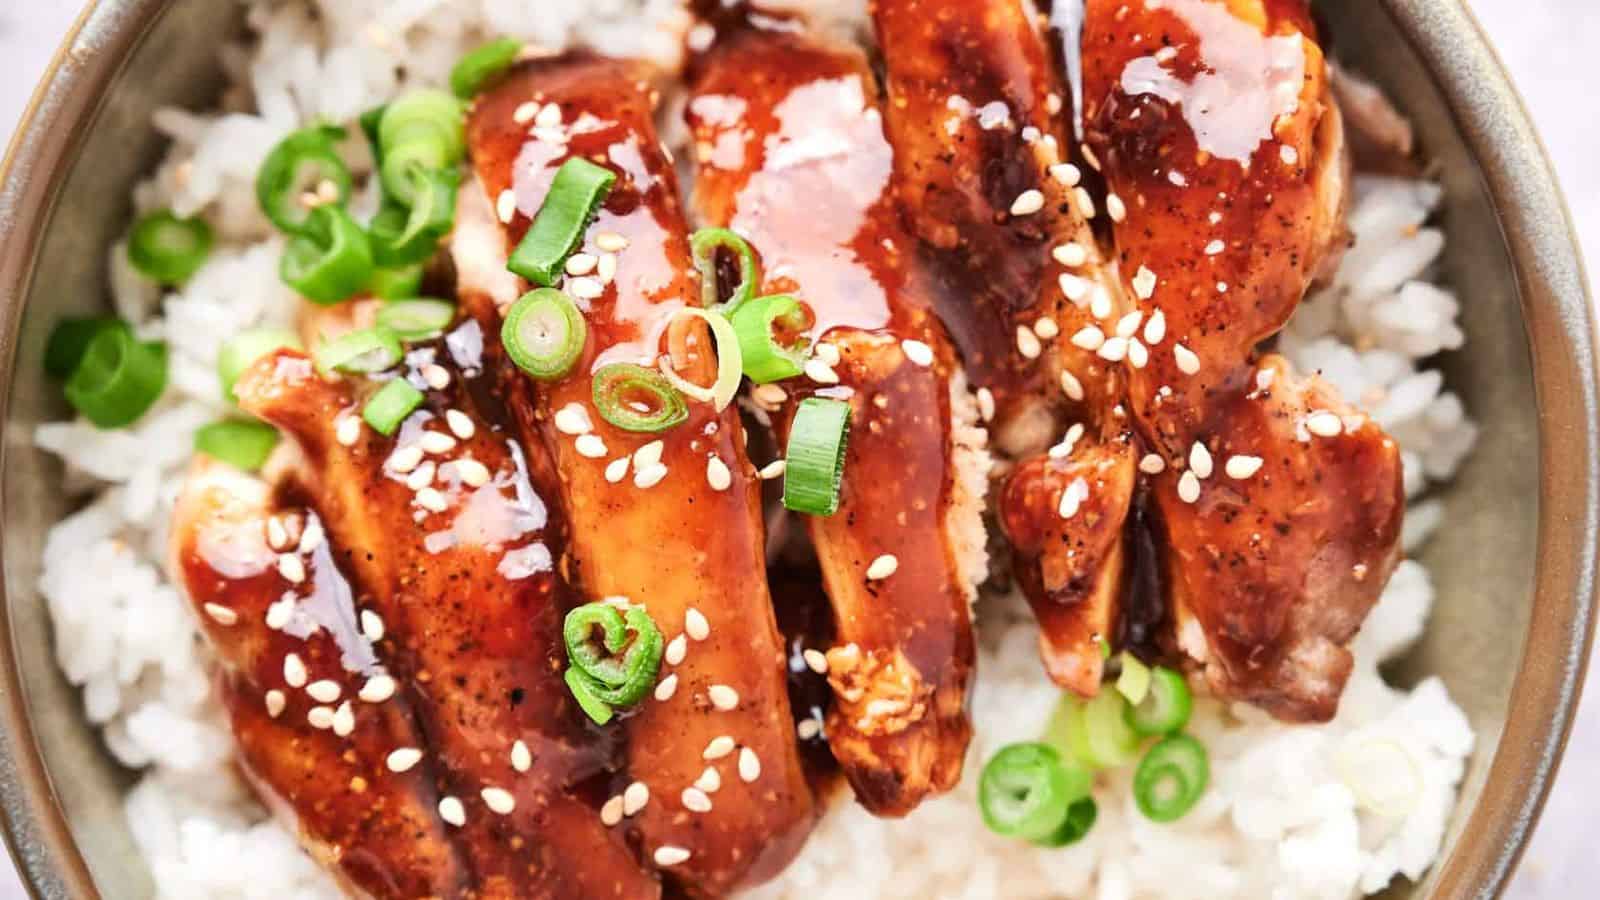 A bowl of white rice topped with glazed chicken and garnished with green onions and sesame seeds.